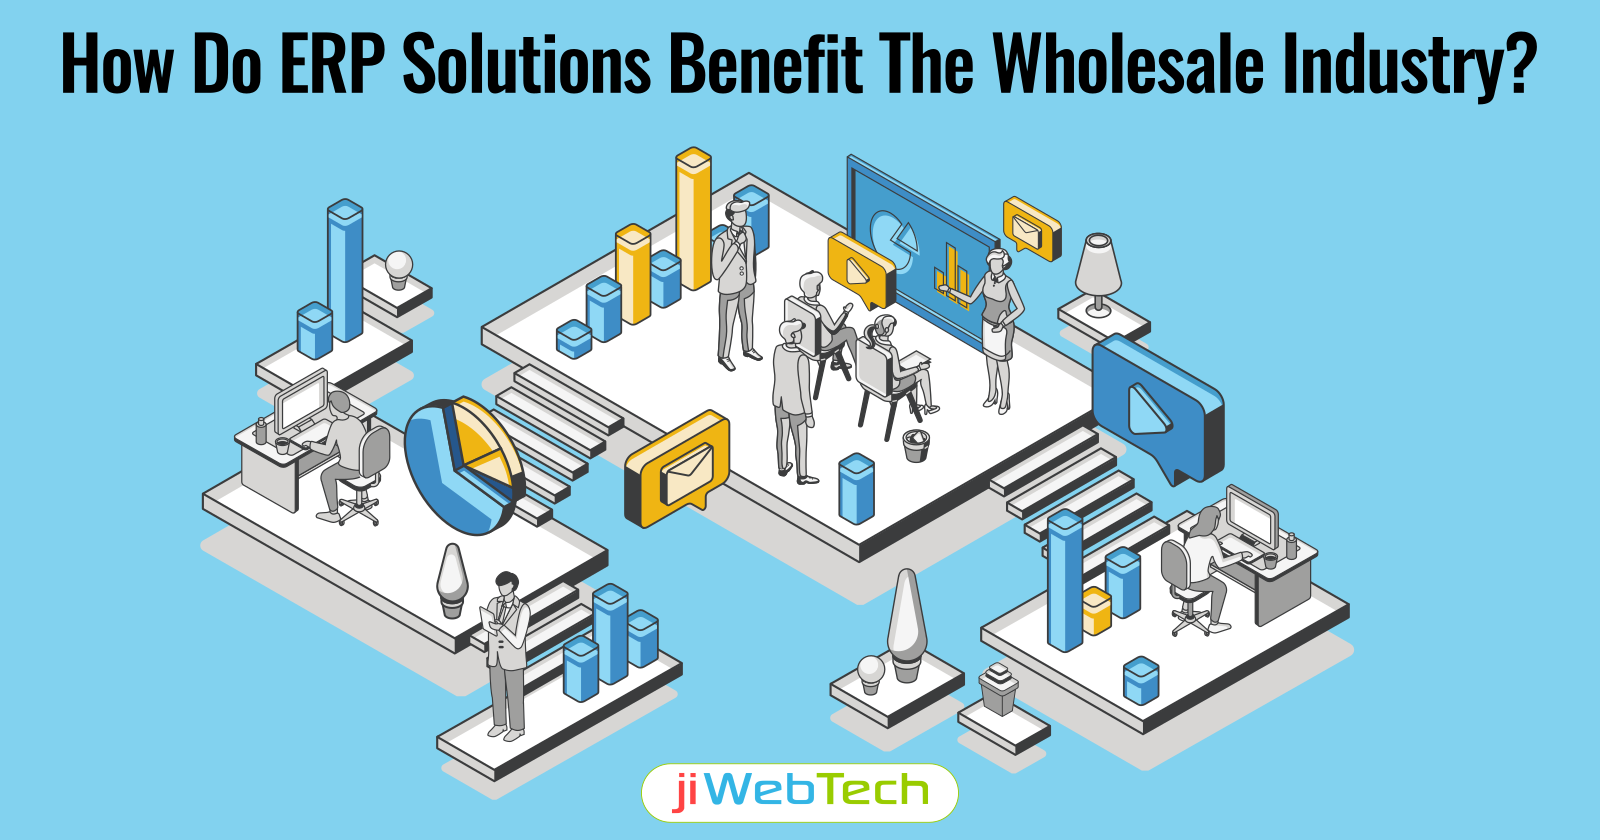 How Do ERP Solutions Benefit The Wholesale Industry?